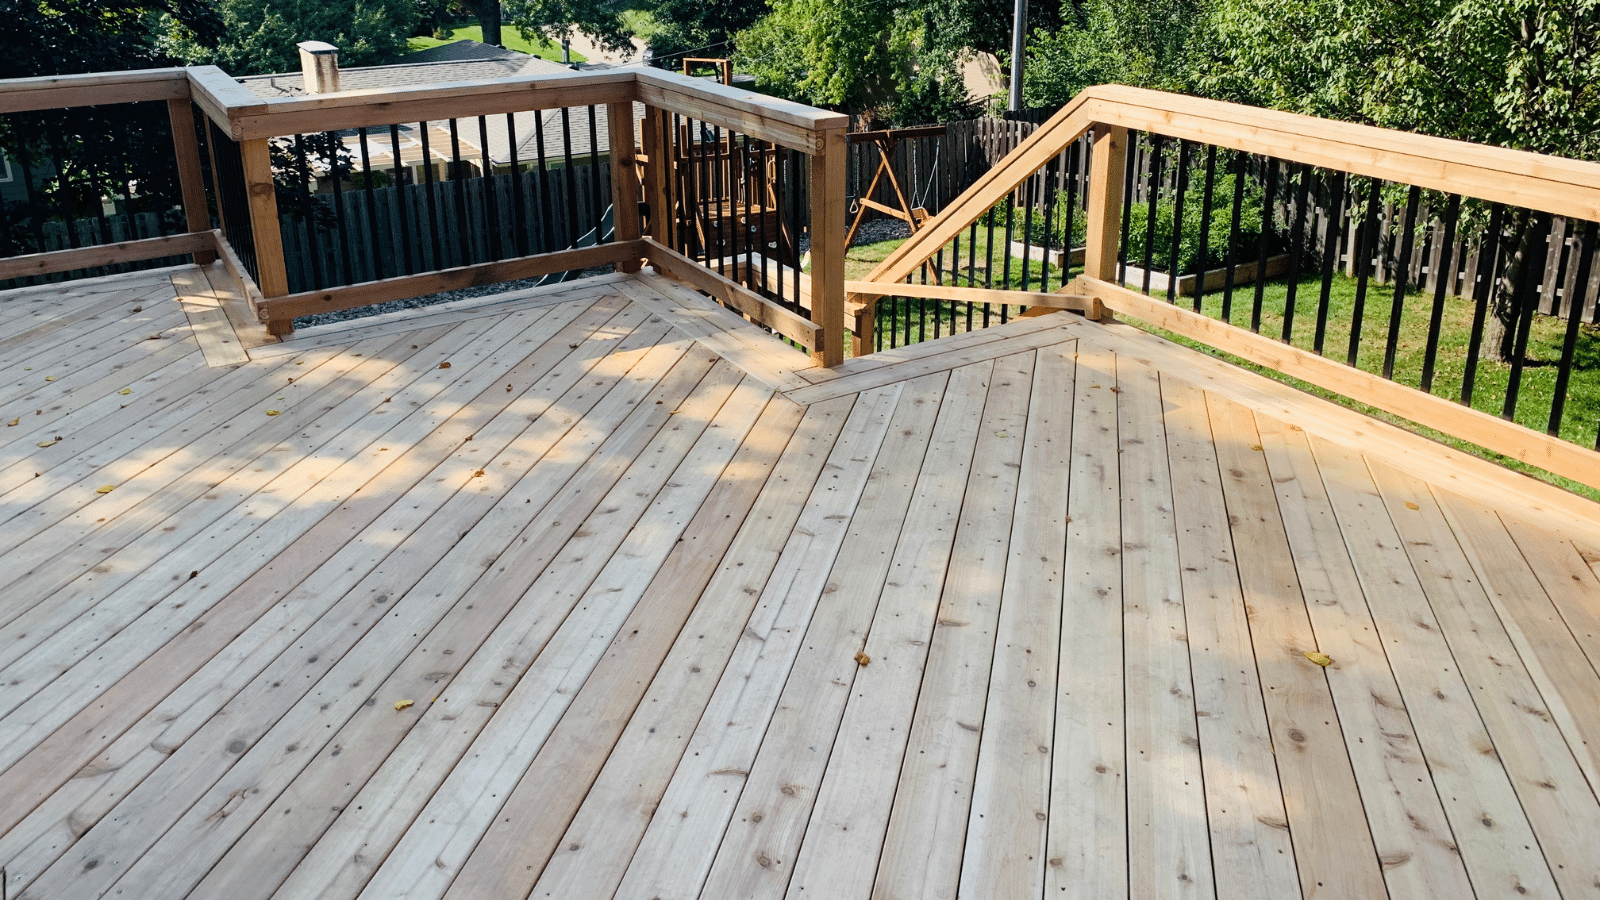 Treated Lumber vs. Cedar: Choosing the Right Material for Your Deck